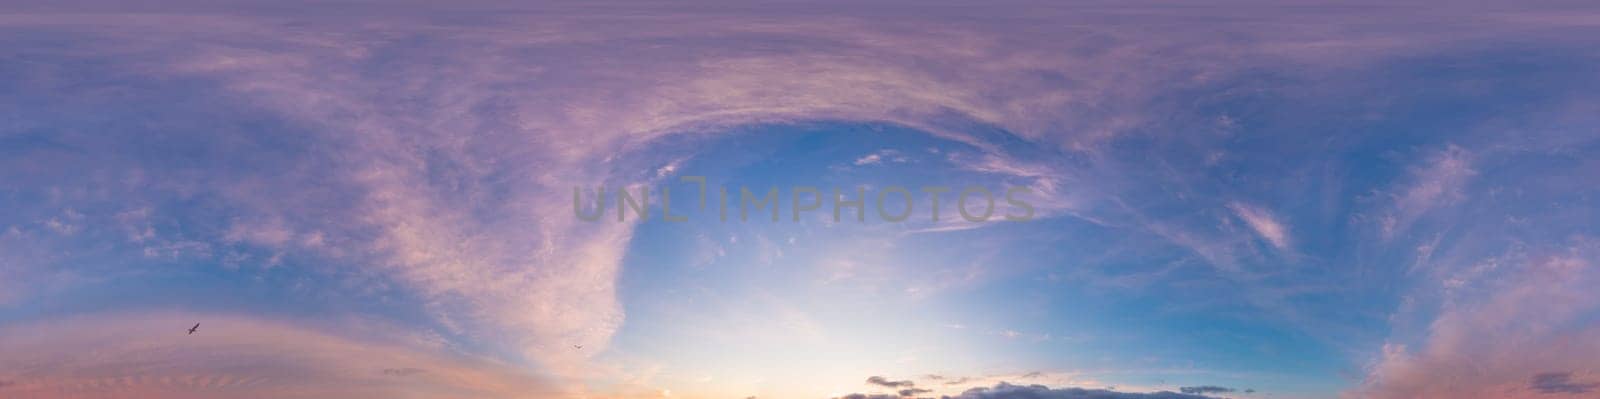 Bright sunset sky panorama with glowing red pink Cirrus clouds. HDR 360 seamless spherical panorama. Sky dome or zenith in 3D, sky replacement for aerial drone panoramas. Climate and weather change. by panophotograph